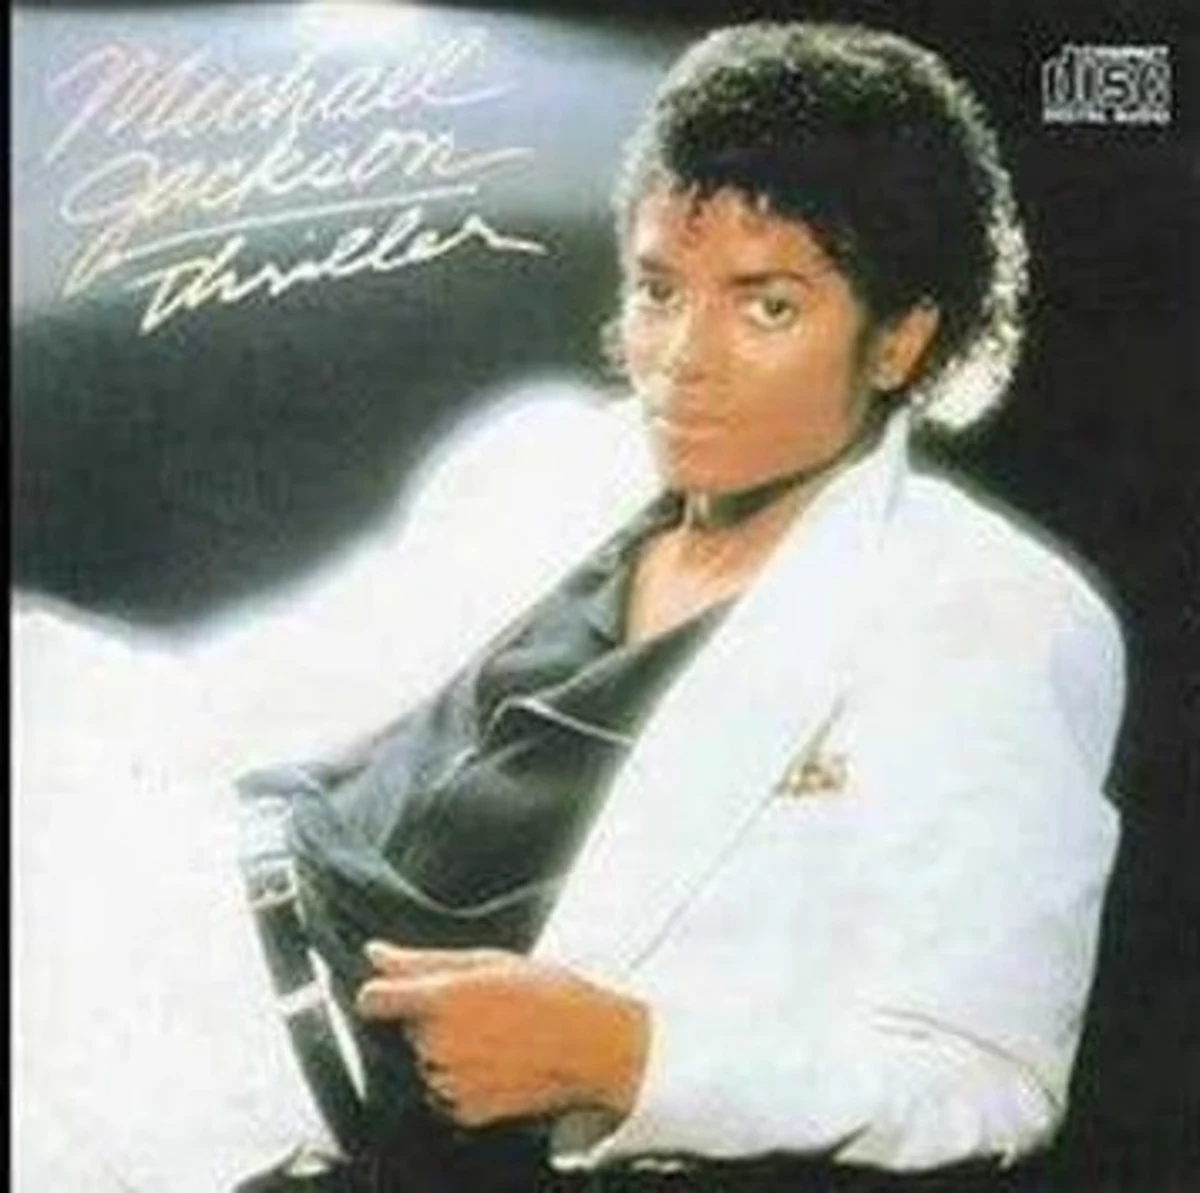 The Importance of Michael Jackson's “Human Nature”